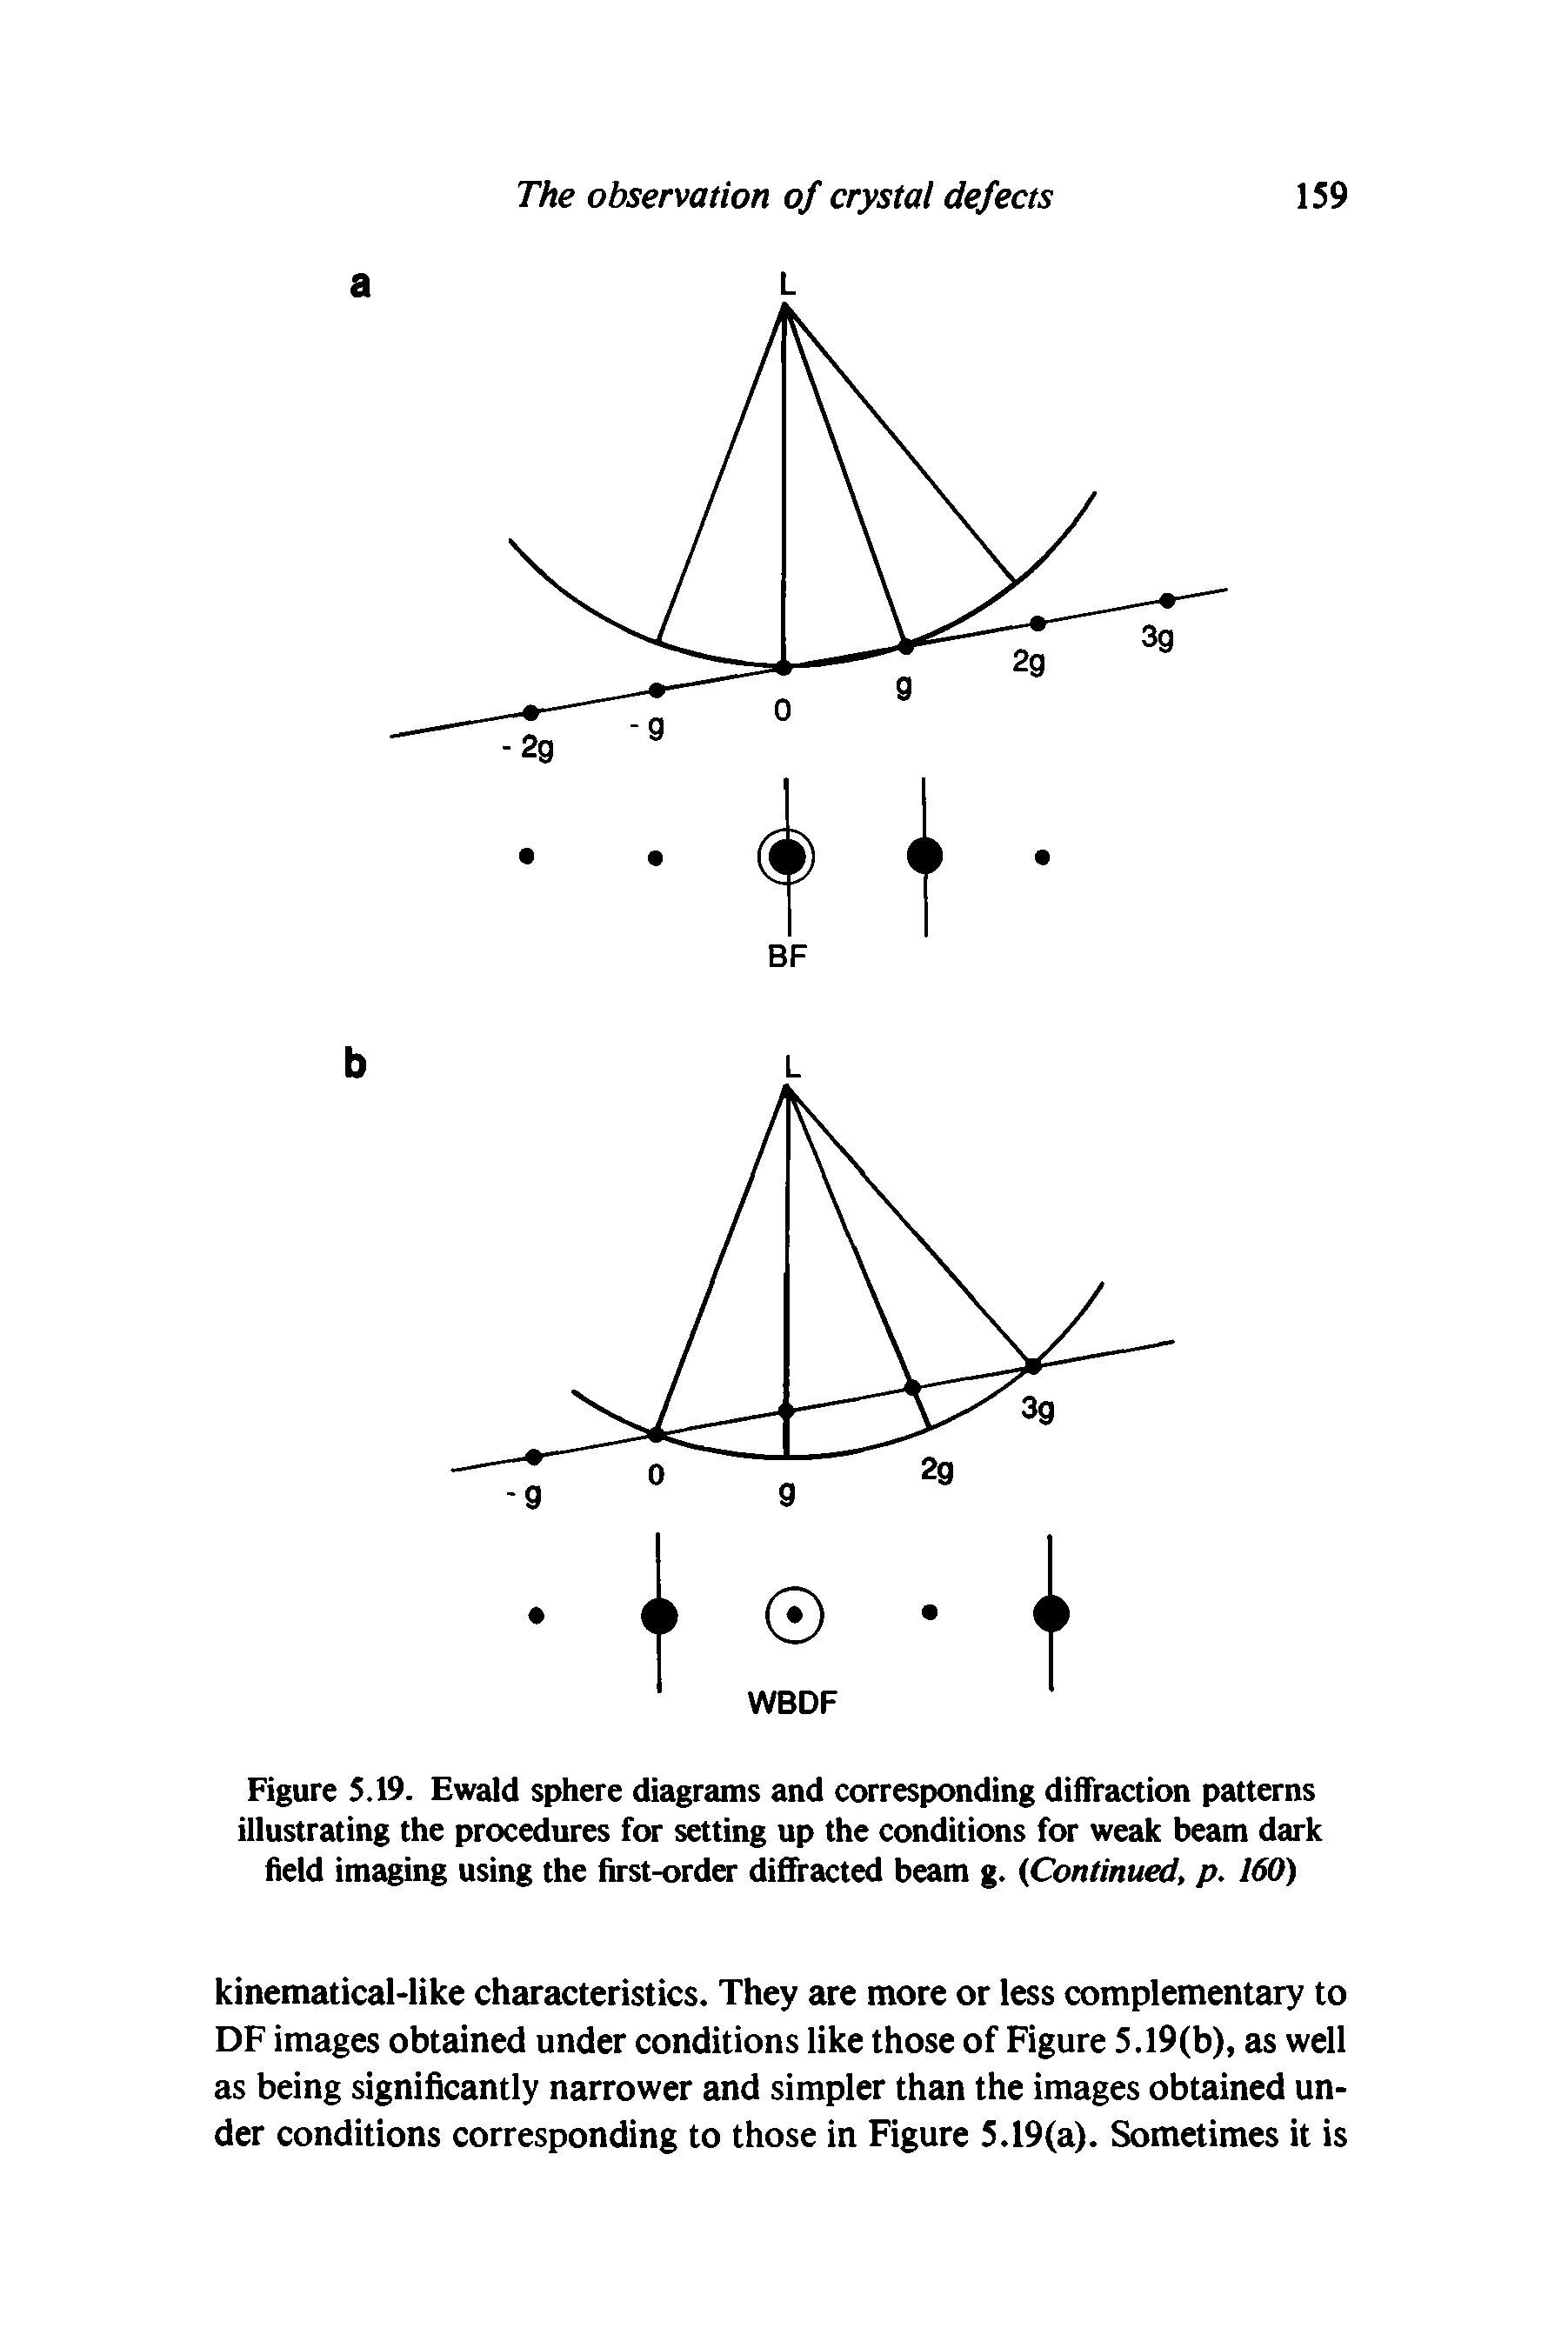 Figure 5.19. Ewald sphere diagrams and corresponding diffraction patterns illustrating the procedures for setting up the conditions for weak beam dark field imaging using the first-order diffracted beam g. Continued, p. 160)...